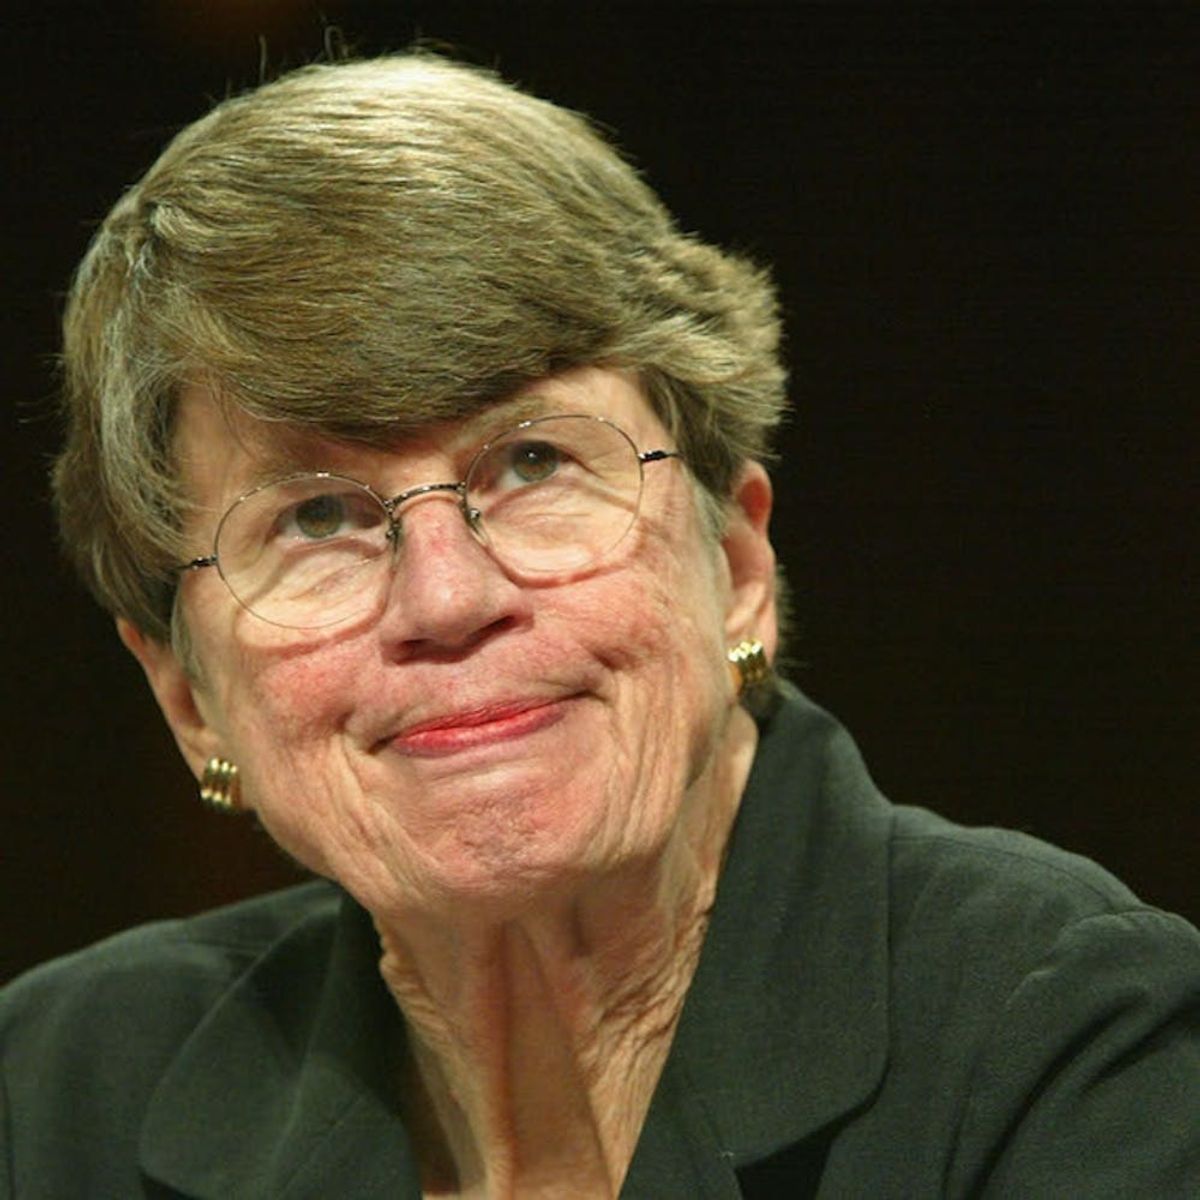 Morning Buzz: The 1st Female US Attorney General Janet Reno Has Died + More